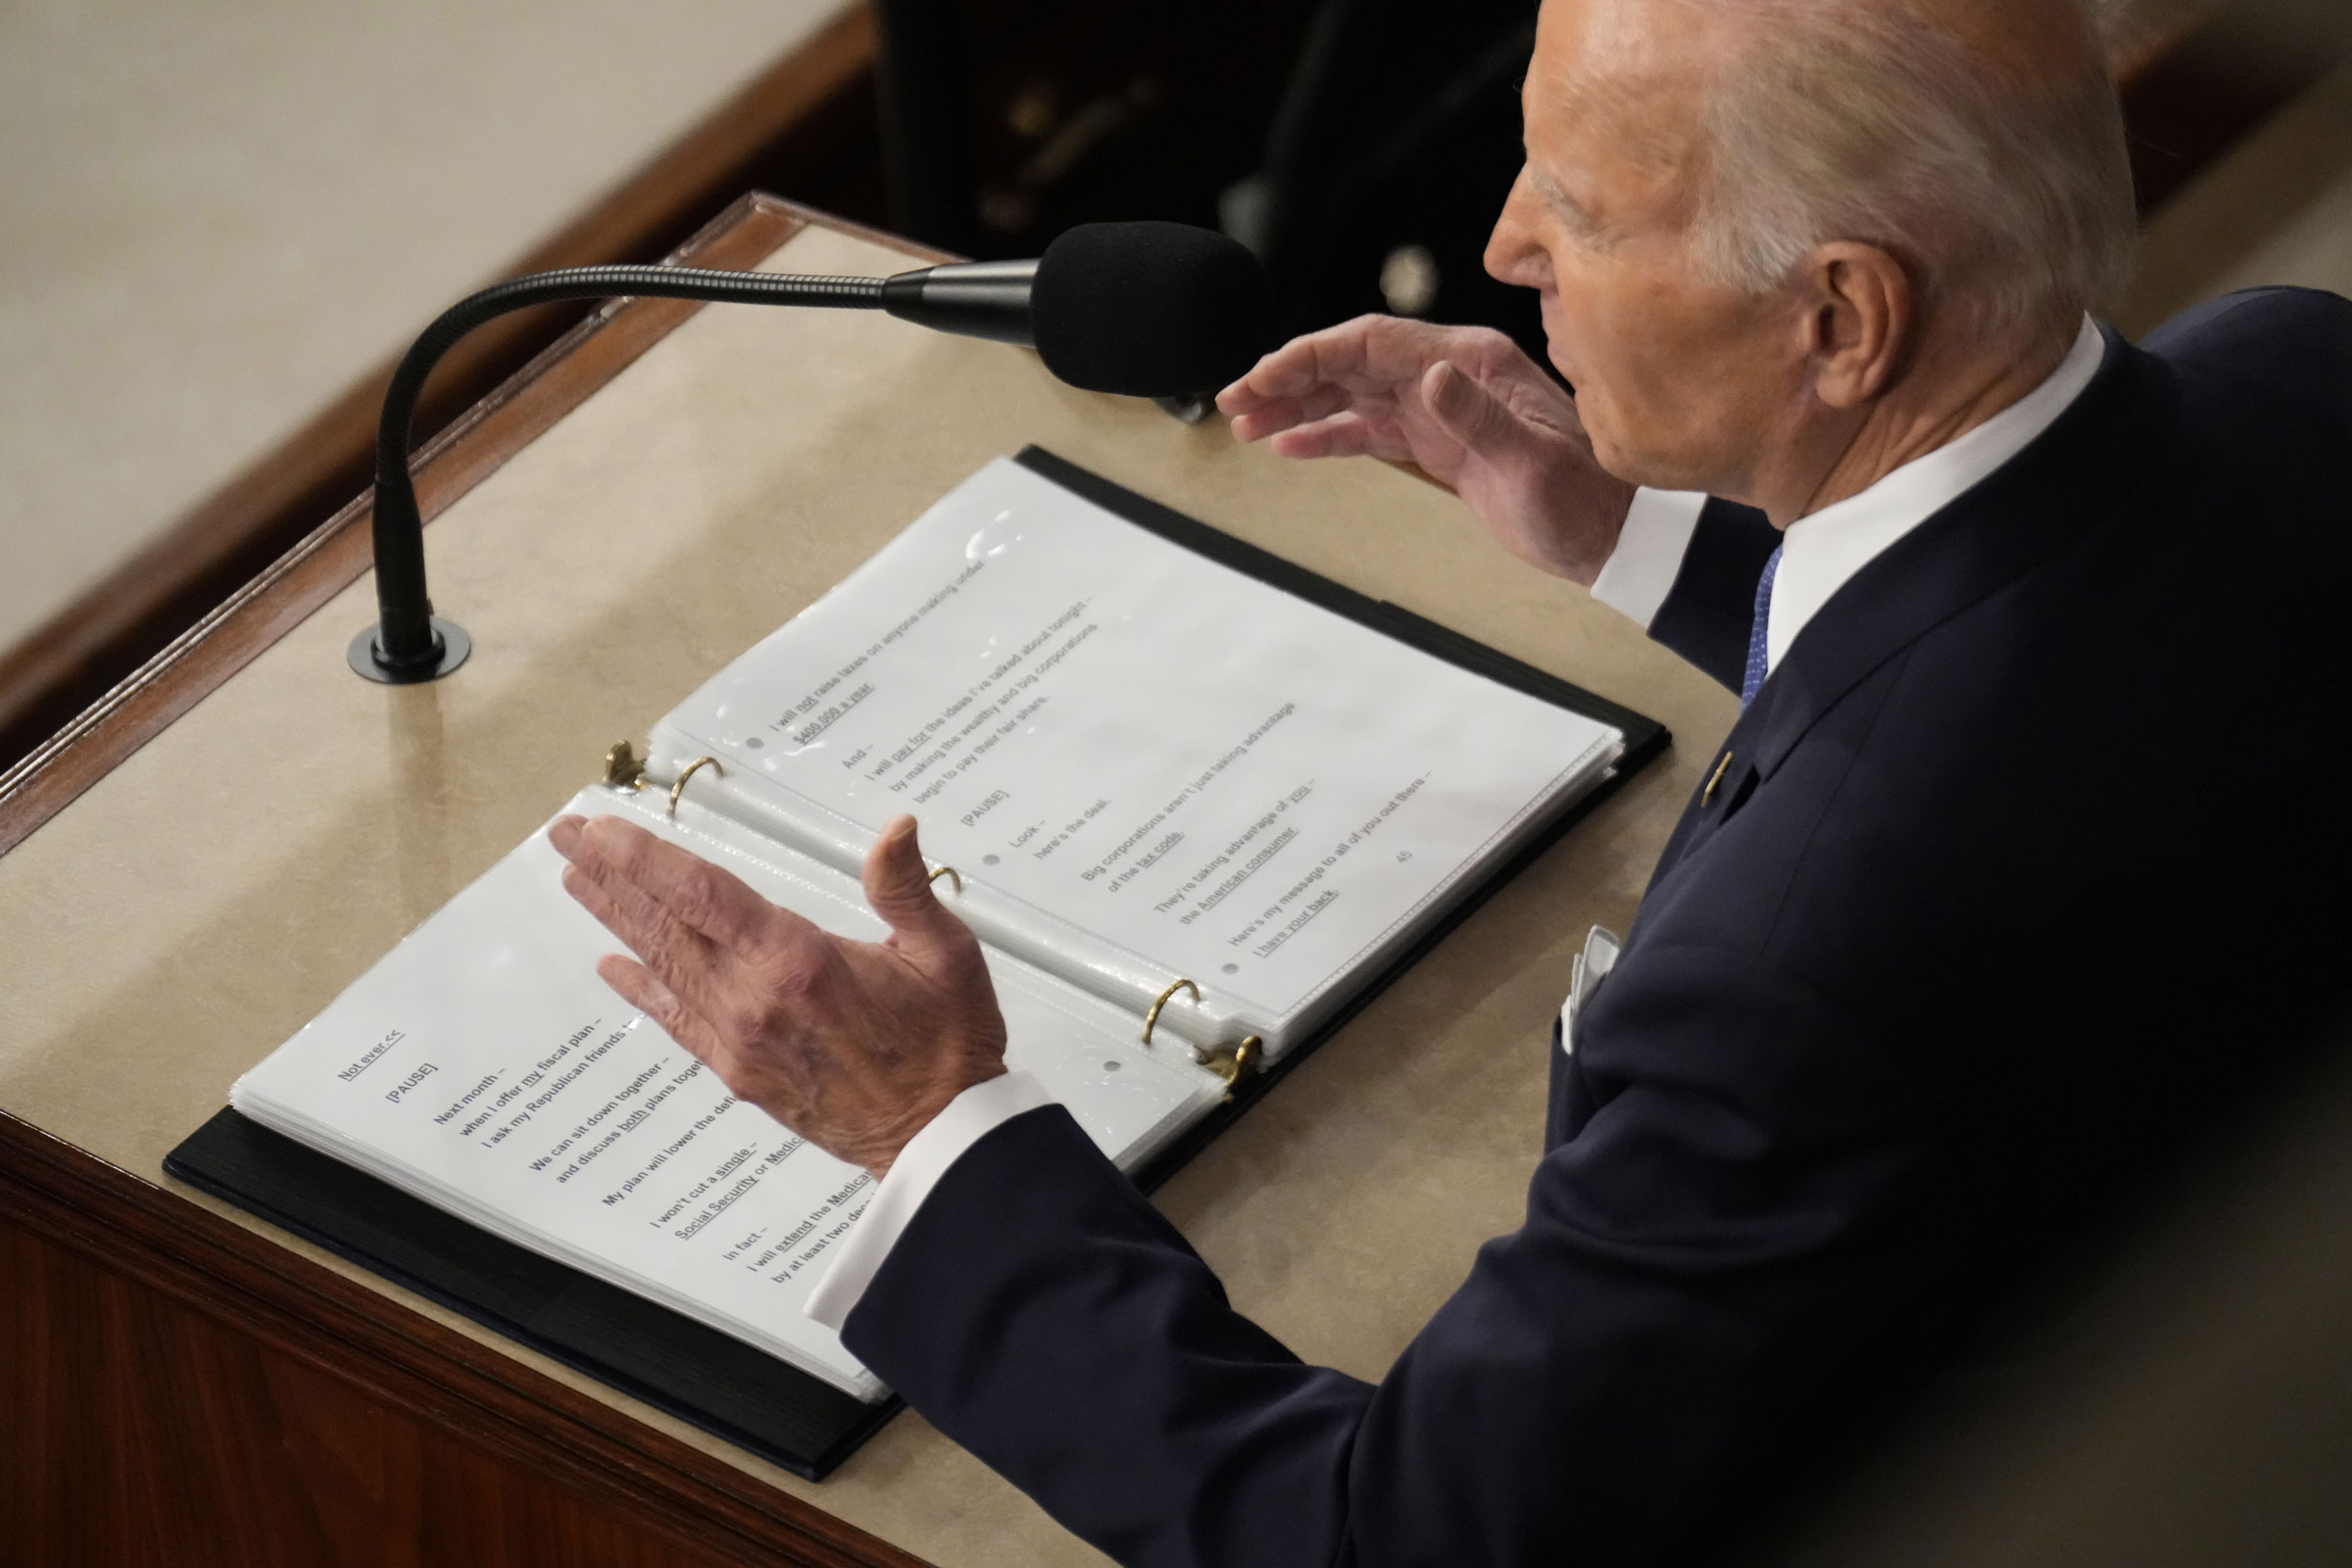 President Joe Biden speaks during a State of the Union address at the U.S. Capitol on Feb. 7, 2023. (Kent Nishimura—Los Angeles Times/Getty Images)